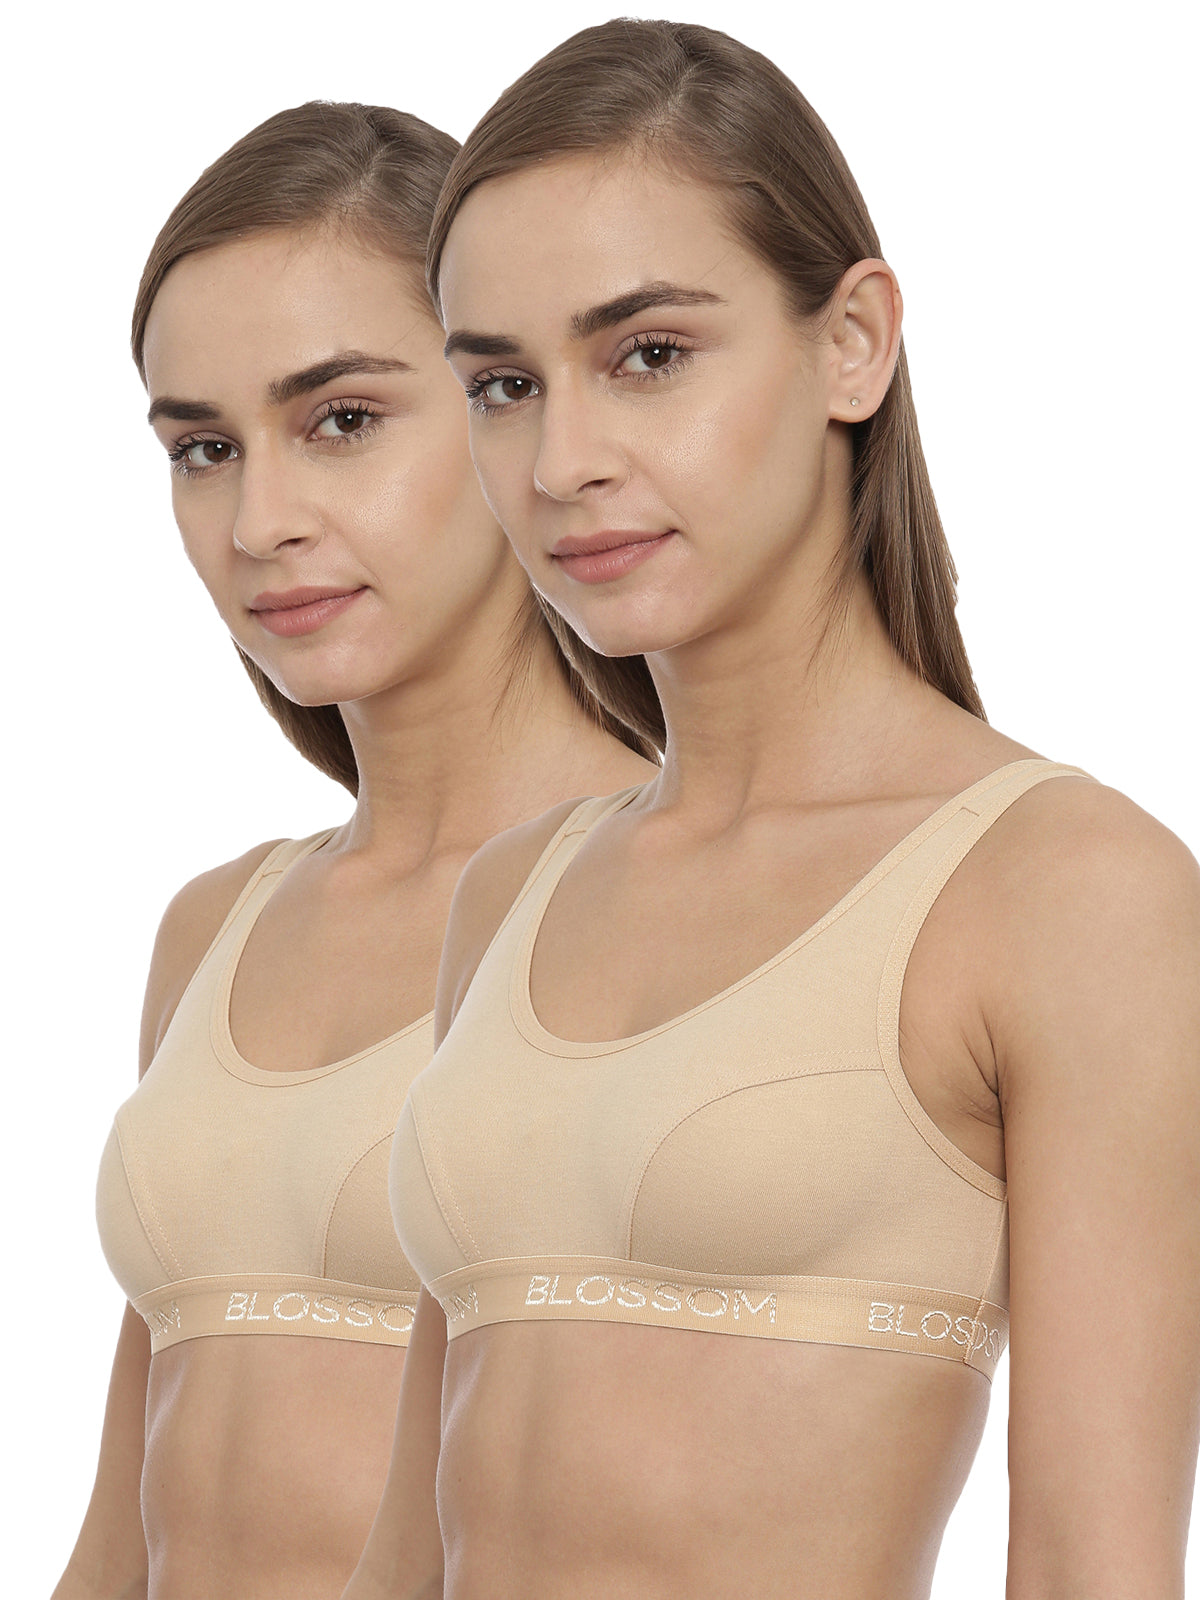 blossom-sporty bra-Pack of 2-skin1-Sports collection-utility based bra